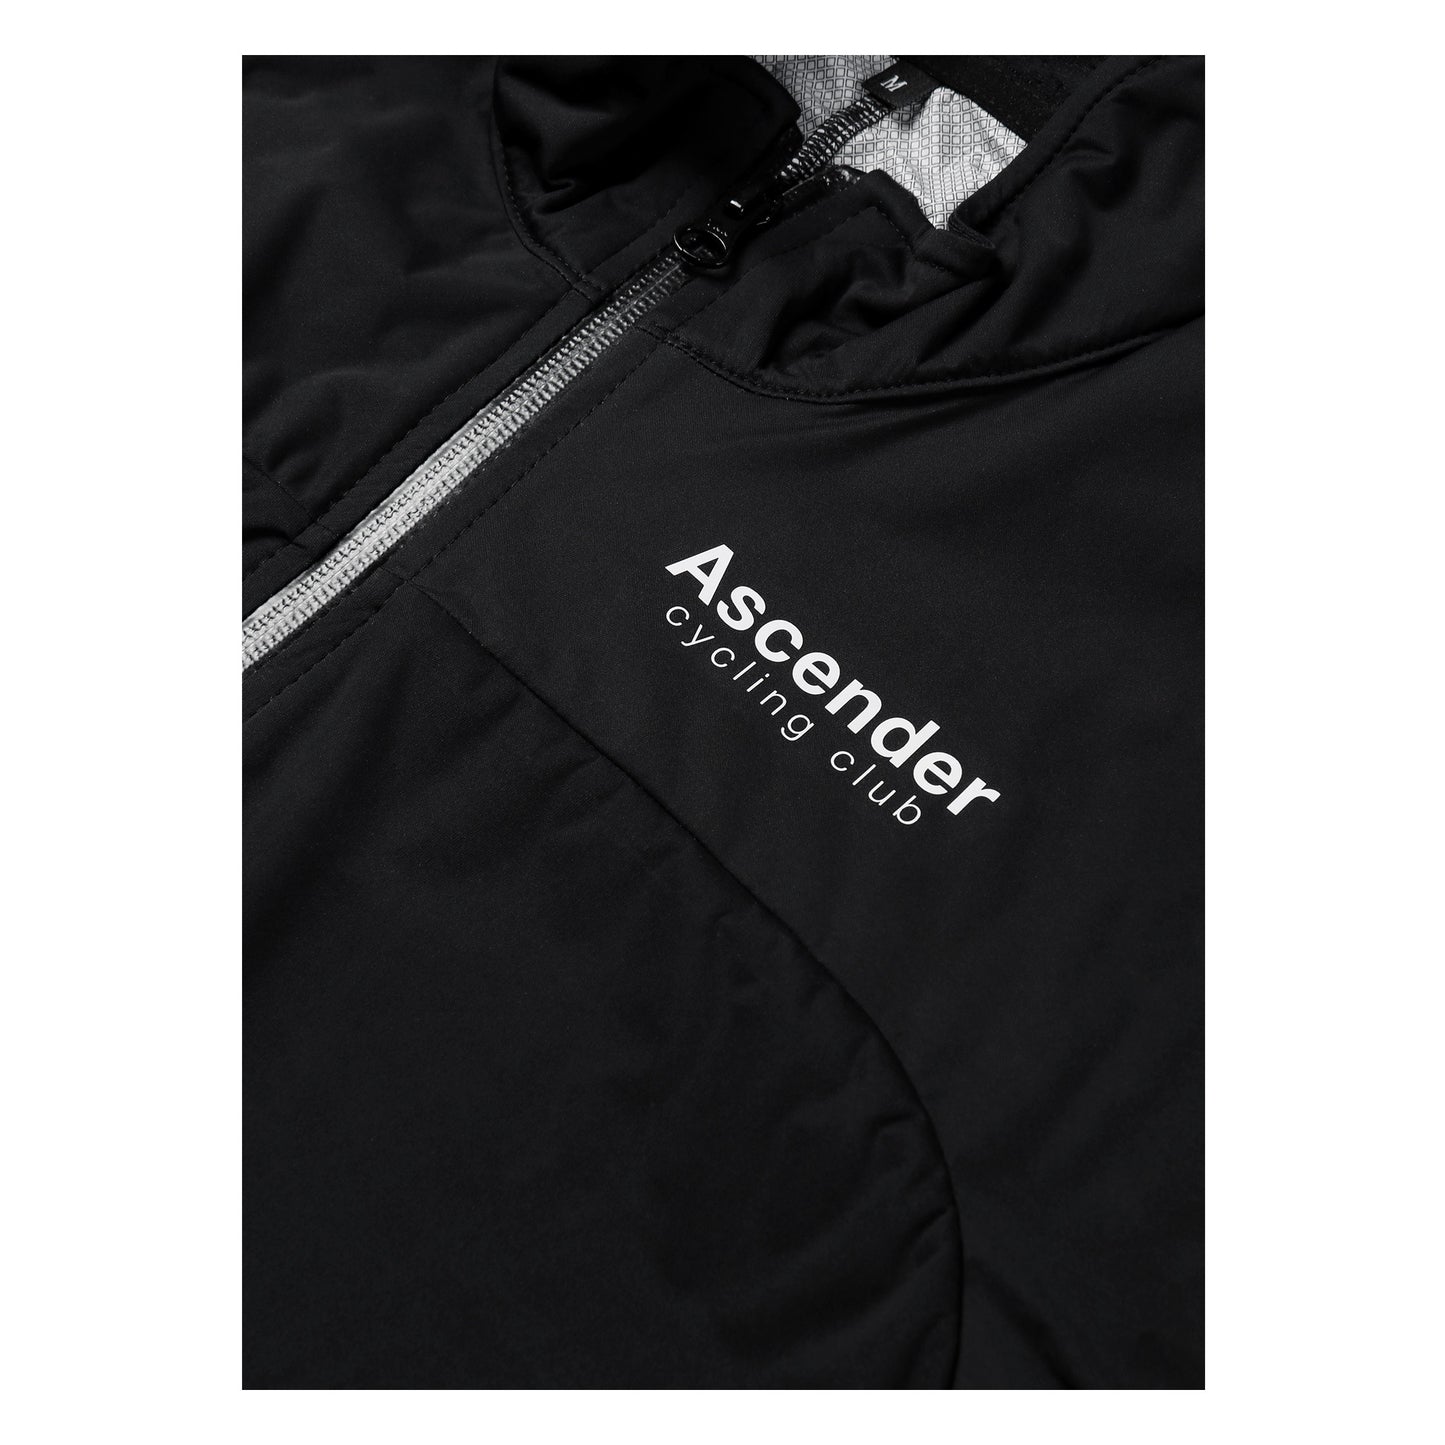  Aquarius Windproof and Waterproof Shield Jacket from Ascender Cycling Club in Zürich Switzerland Front Logo View